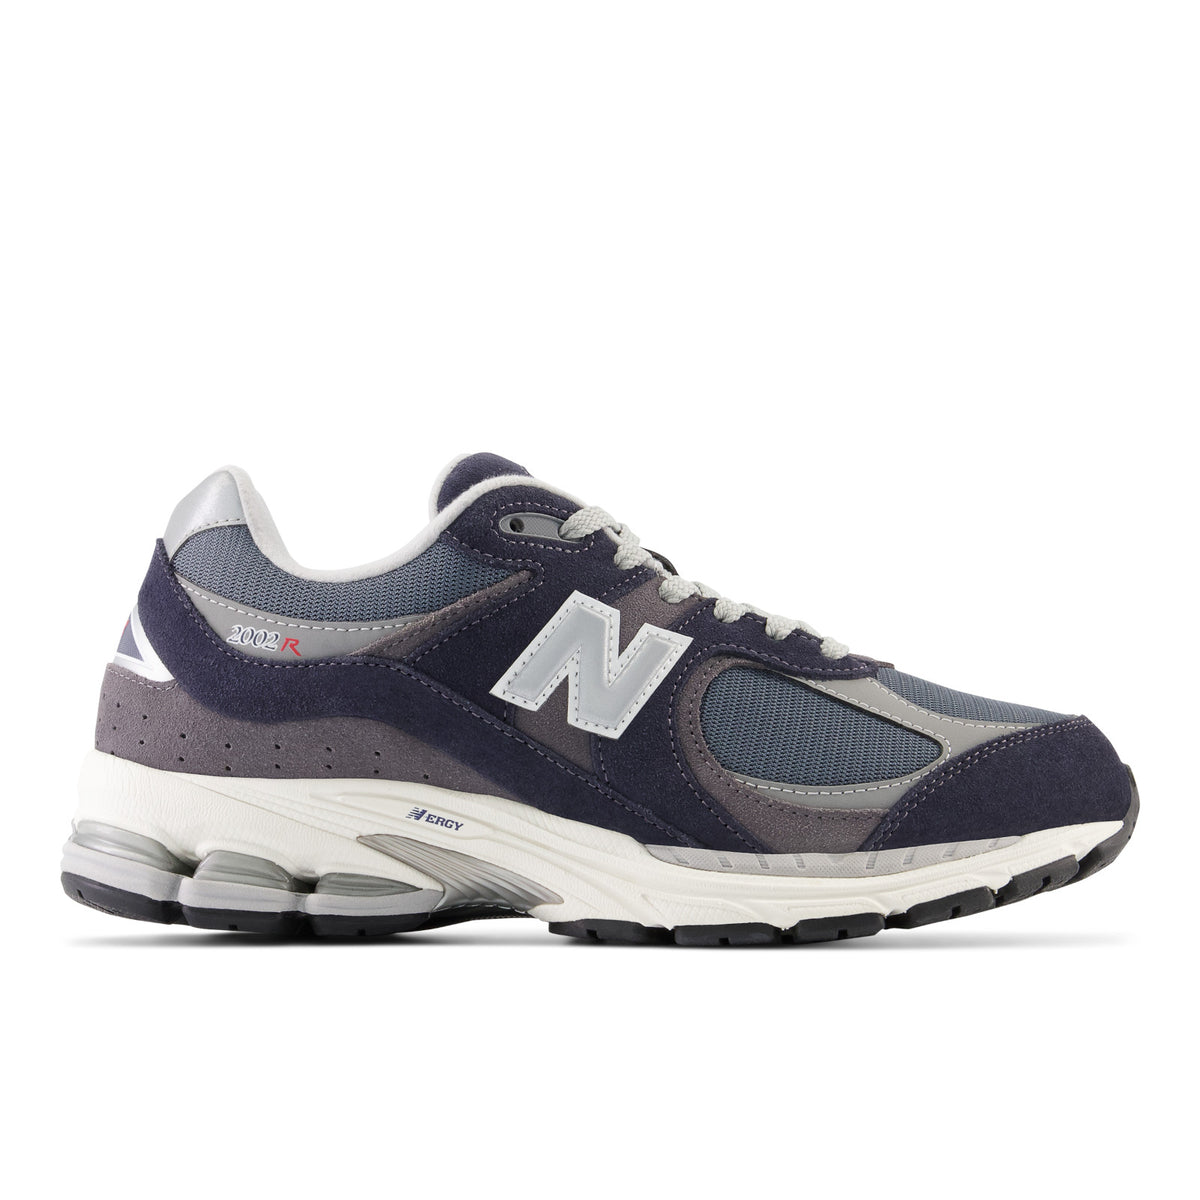 Load image into Gallery viewer, New Balance Eclipse/White 2002 Trainer
